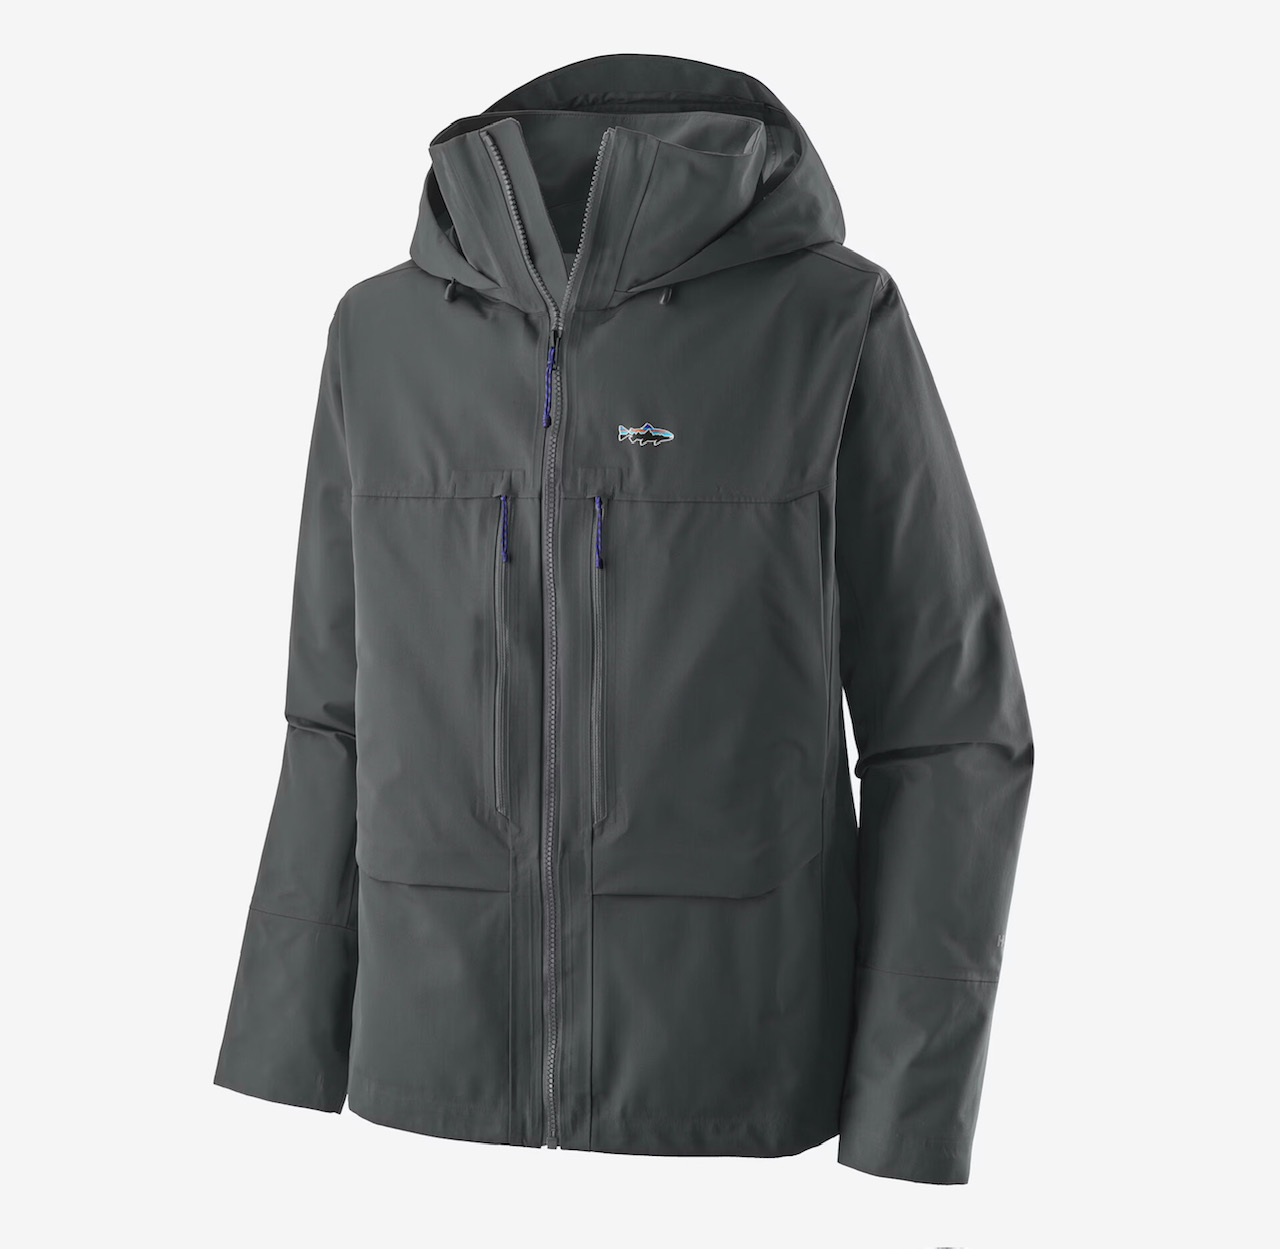 Patagonia M's Swiftcurrent Wading Jacket - Forge Grey - Large